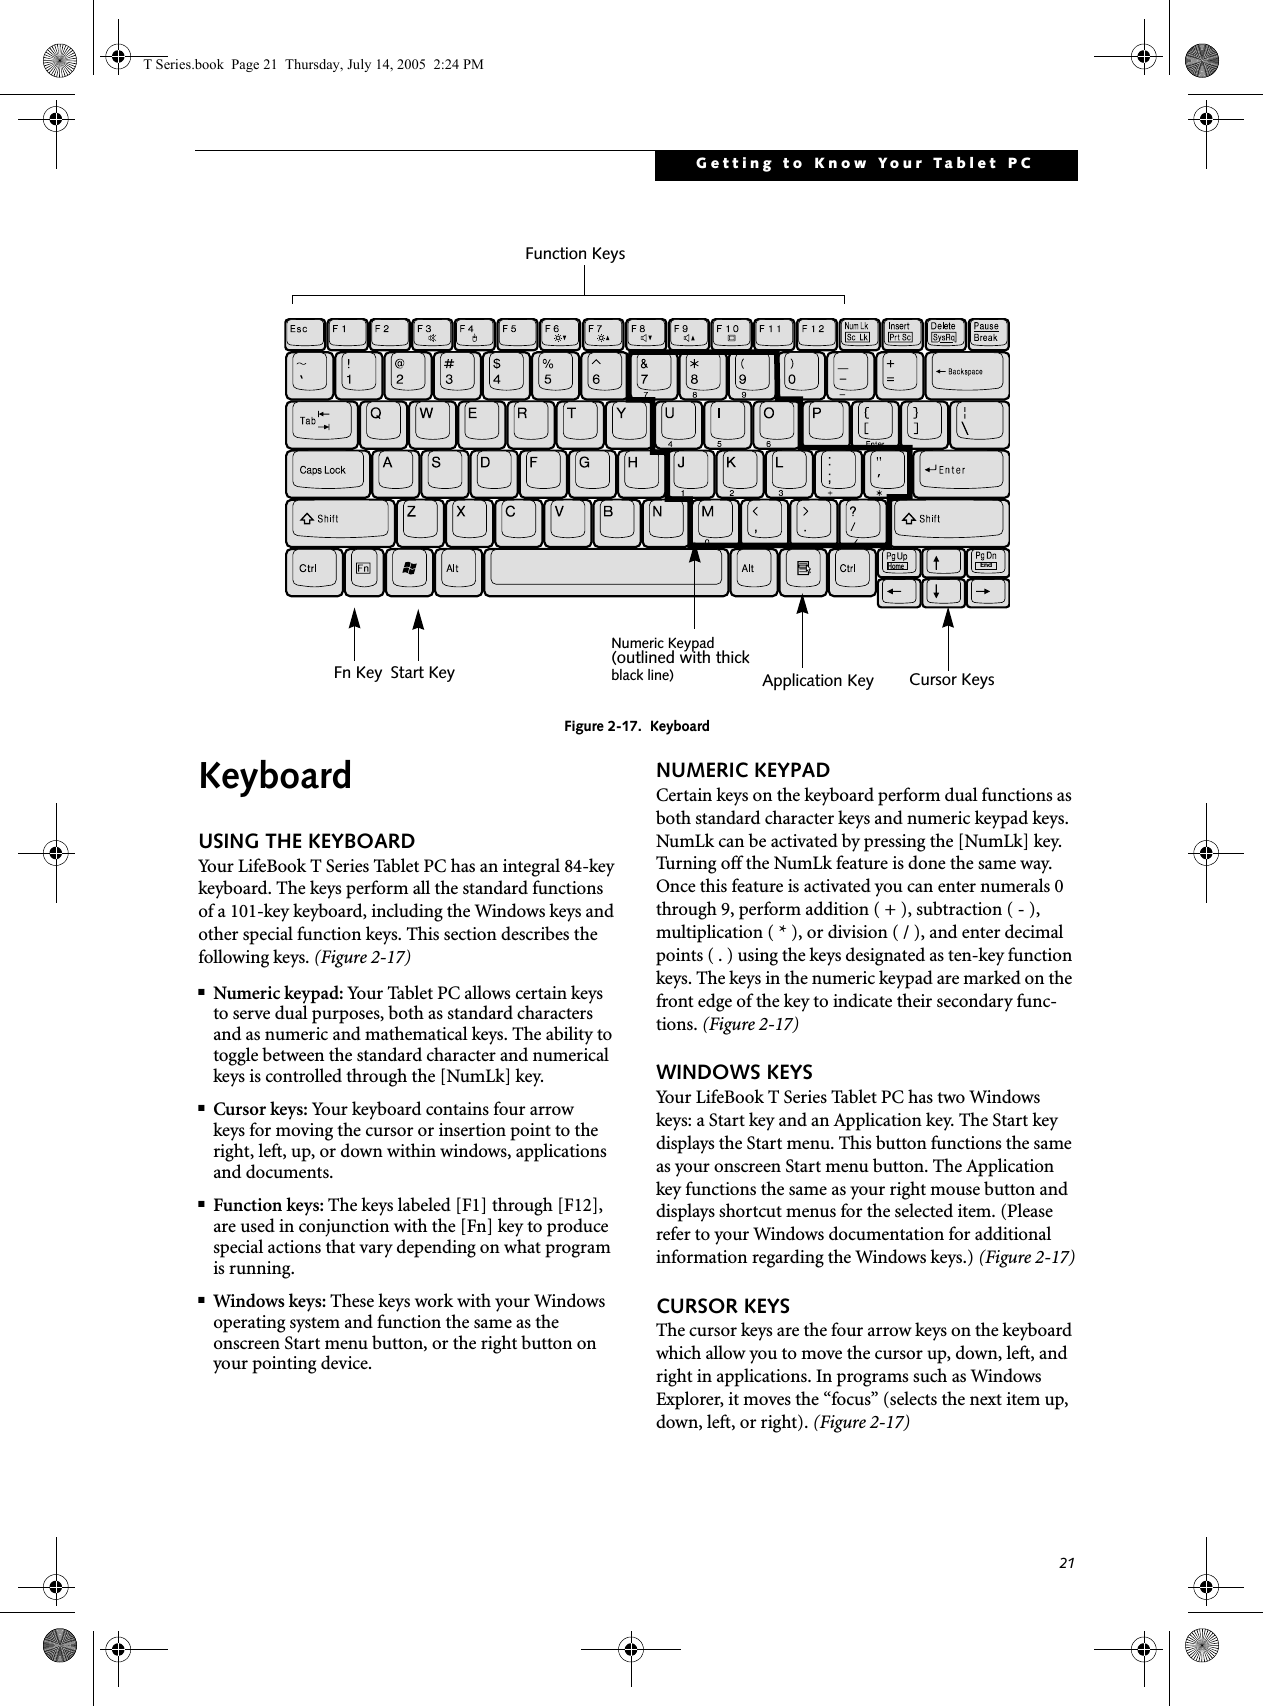 21Getting to Know Your Tablet PCFigure 2-17.  KeyboardKeyboardUSING THE KEYBOARDYour LifeBook T Series Tablet PC has an integral 84-key keyboard. The keys perform all the standard functions of a 101-key keyboard, including the Windows keys and other special function keys. This section describes the following keys. (Figure 2-17)■Numeric keypad: Your Tablet PC allows certain keys to serve dual purposes, both as standard characters and as numeric and mathematical keys. The ability to toggle between the standard character and numerical keys is controlled through the [NumLk] key.■Cursor keys: Your keyboard contains four arrowkeys for moving the cursor or insertion point to the right, left, up, or down within windows, applications and documents. ■Function keys: The keys labeled [F1] through [F12], are used in conjunction with the [Fn] key to produce special actions that vary depending on what program is running. ■Windows keys: These keys work with your Windows operating system and function the same as the onscreen Start menu button, or the right button on your pointing device.NUMERIC KEYPADCertain keys on the keyboard perform dual functions as both standard character keys and numeric keypad keys. NumLk can be activated by pressing the [NumLk] key. Turning off the NumLk feature is done the same way. Once this feature is activated you can enter numerals 0 through 9, perform addition ( + ), subtraction ( - ),multiplication ( * ), or division ( / ), and enter decimal points ( . ) using the keys designated as ten-key function keys. The keys in the numeric keypad are marked on the front edge of the key to indicate their secondary func-tions. (Figure 2-17) WINDOWS KEYSYour LifeBook T Series Tablet PC has two Windows keys: a Start key and an Application key. The Start key displays the Start menu. This button functions the same as your onscreen Start menu button. The Application key functions the same as your right mouse button and displays shortcut menus for the selected item. (Please refer to your Windows documentation for additional information regarding the Windows keys.) (Figure 2-17)CURSOR KEYSThe cursor keys are the four arrow keys on the keyboard which allow you to move the cursor up, down, left, and right in applications. In programs such as Windows Explorer, it moves the “focus” (selects the next item up, down, left, or right). (Figure 2-17)EndHomeFn Key Start KeyFunction KeysNumeric KeypadApplication Key Cursor Keys(outlined with thickblack line) T Series.book  Page 21  Thursday, July 14, 2005  2:24 PM